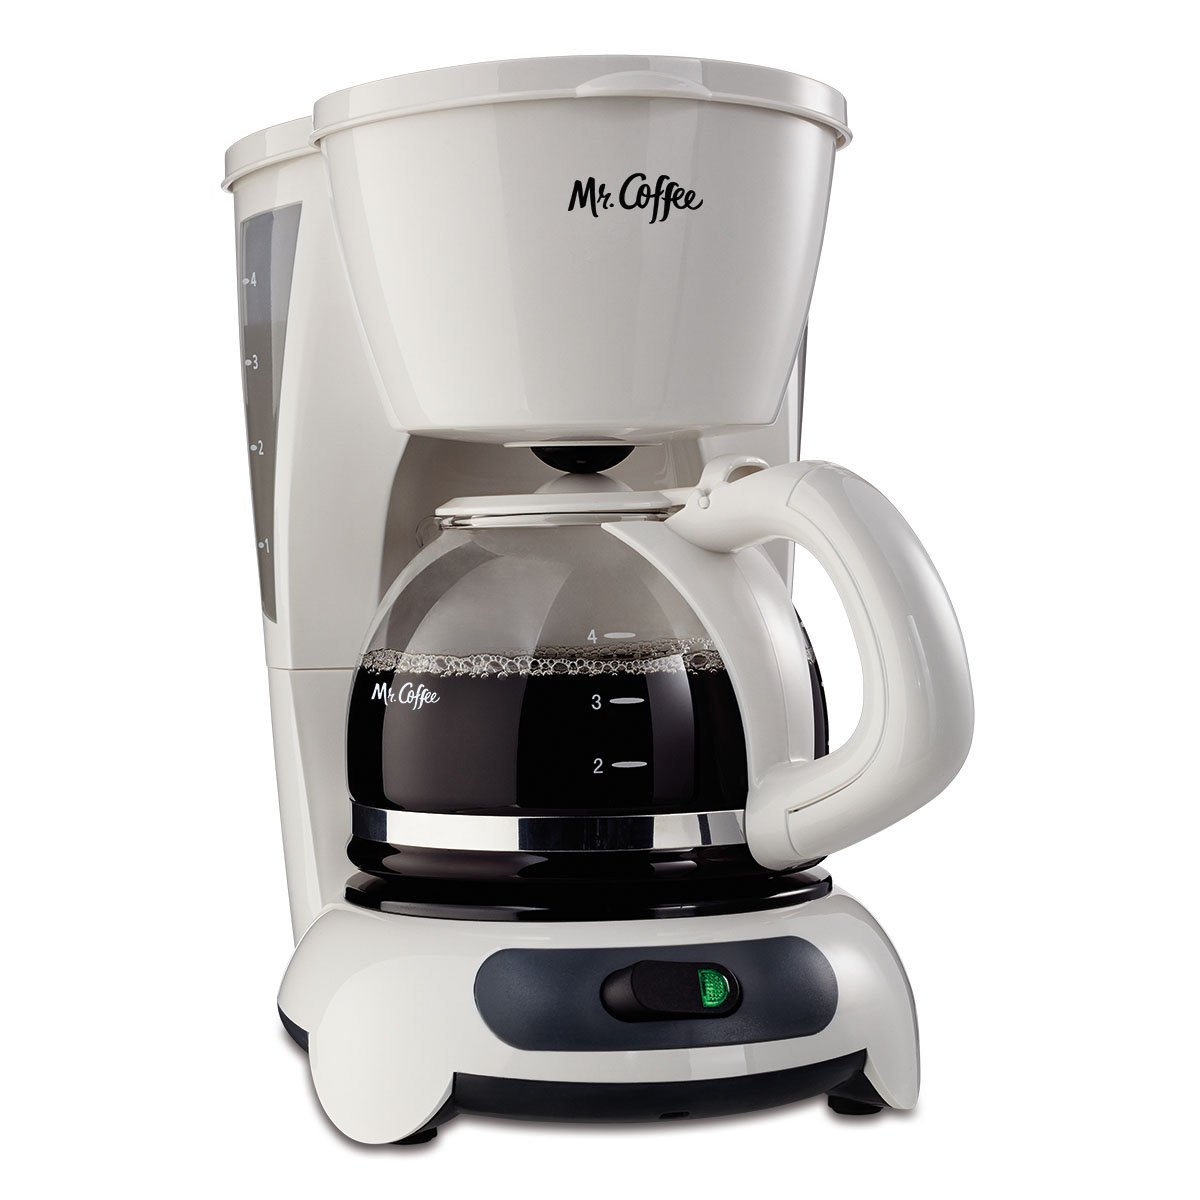 Mr Coffee 4 Cup Coffeemaker, Auto Off, Pause n Serve, Glass Carafe Mr Coffee 4 Cup Coffee Maker With Stainless Steel Carafe